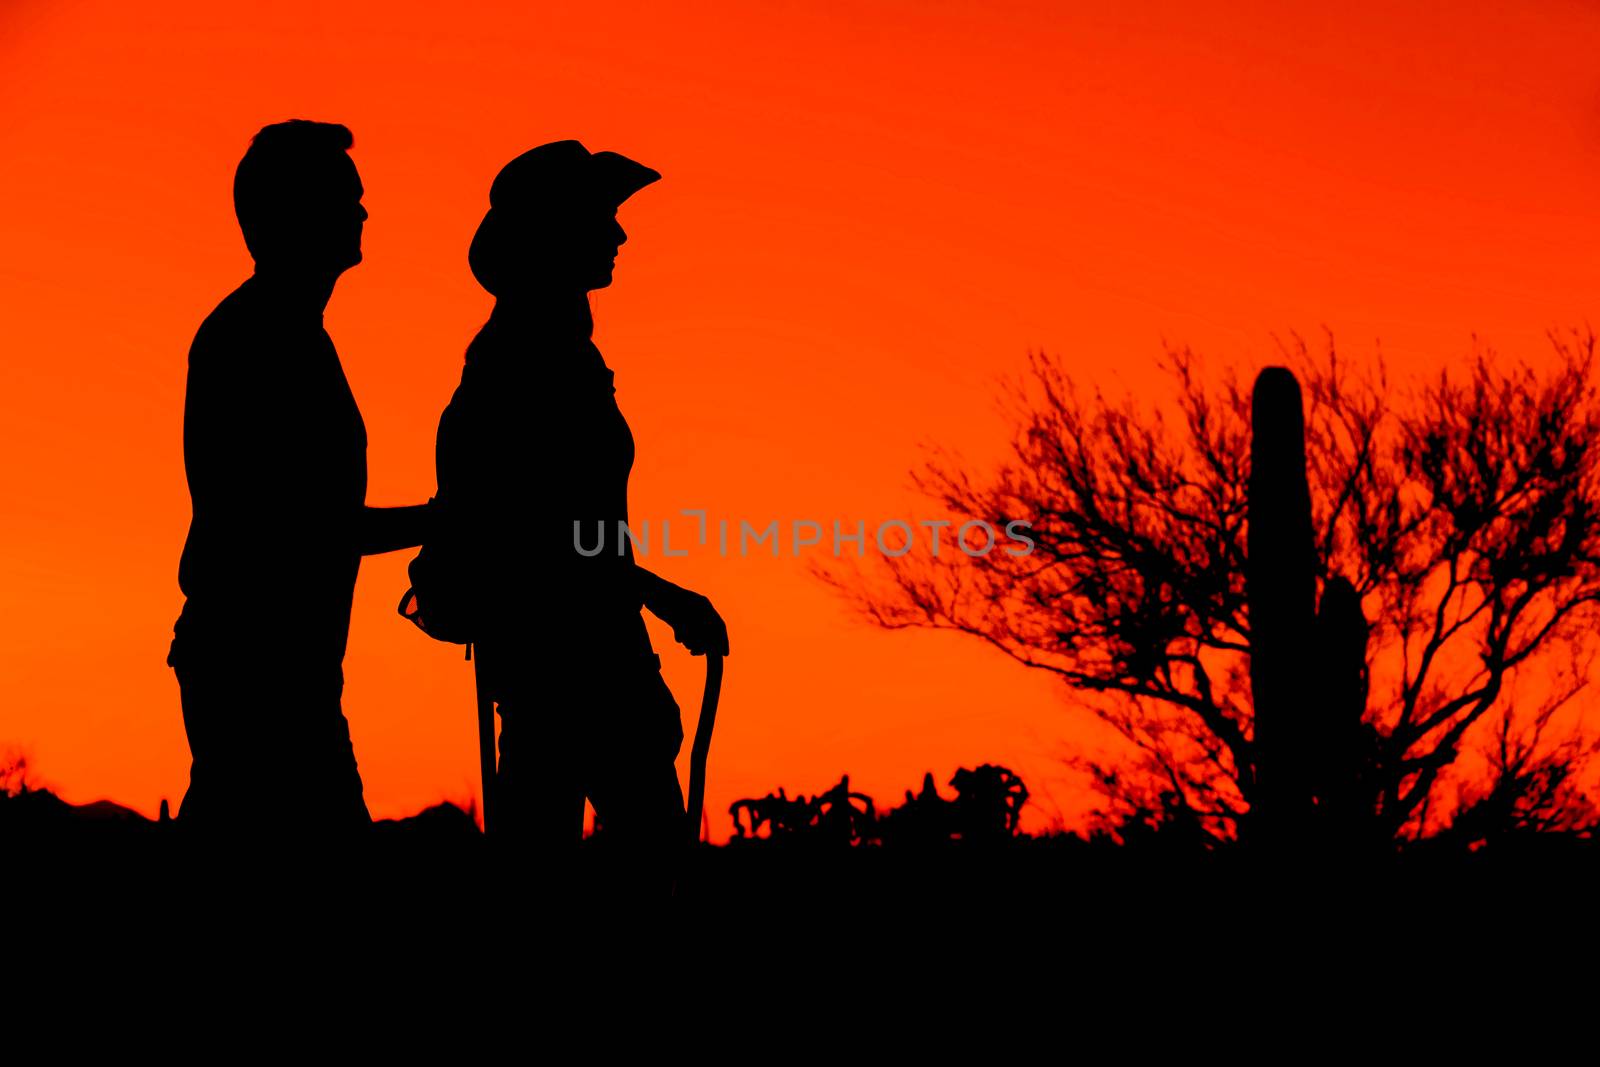 Hiker Silhouettes by Creatista